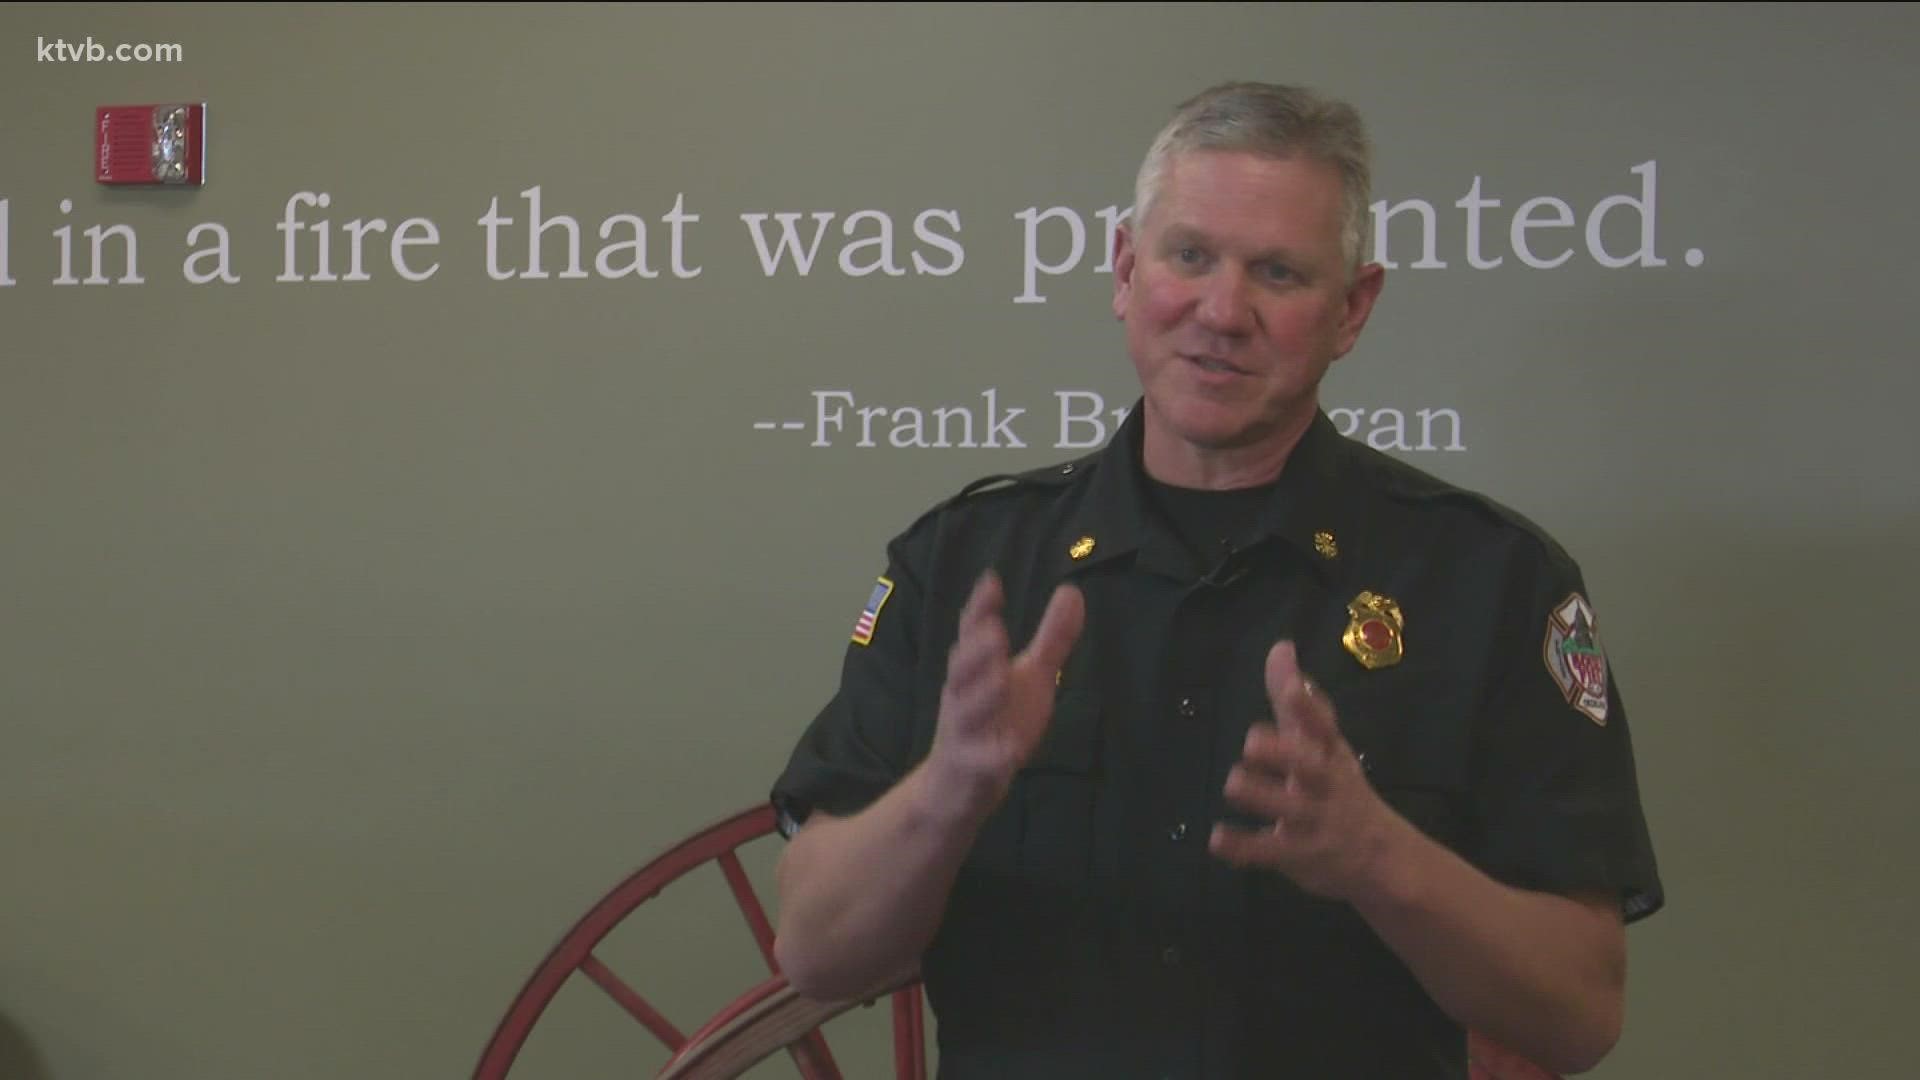 "What used to be a season has now become a year-long event," said Boise Fire Chief Mark Niemeyer.